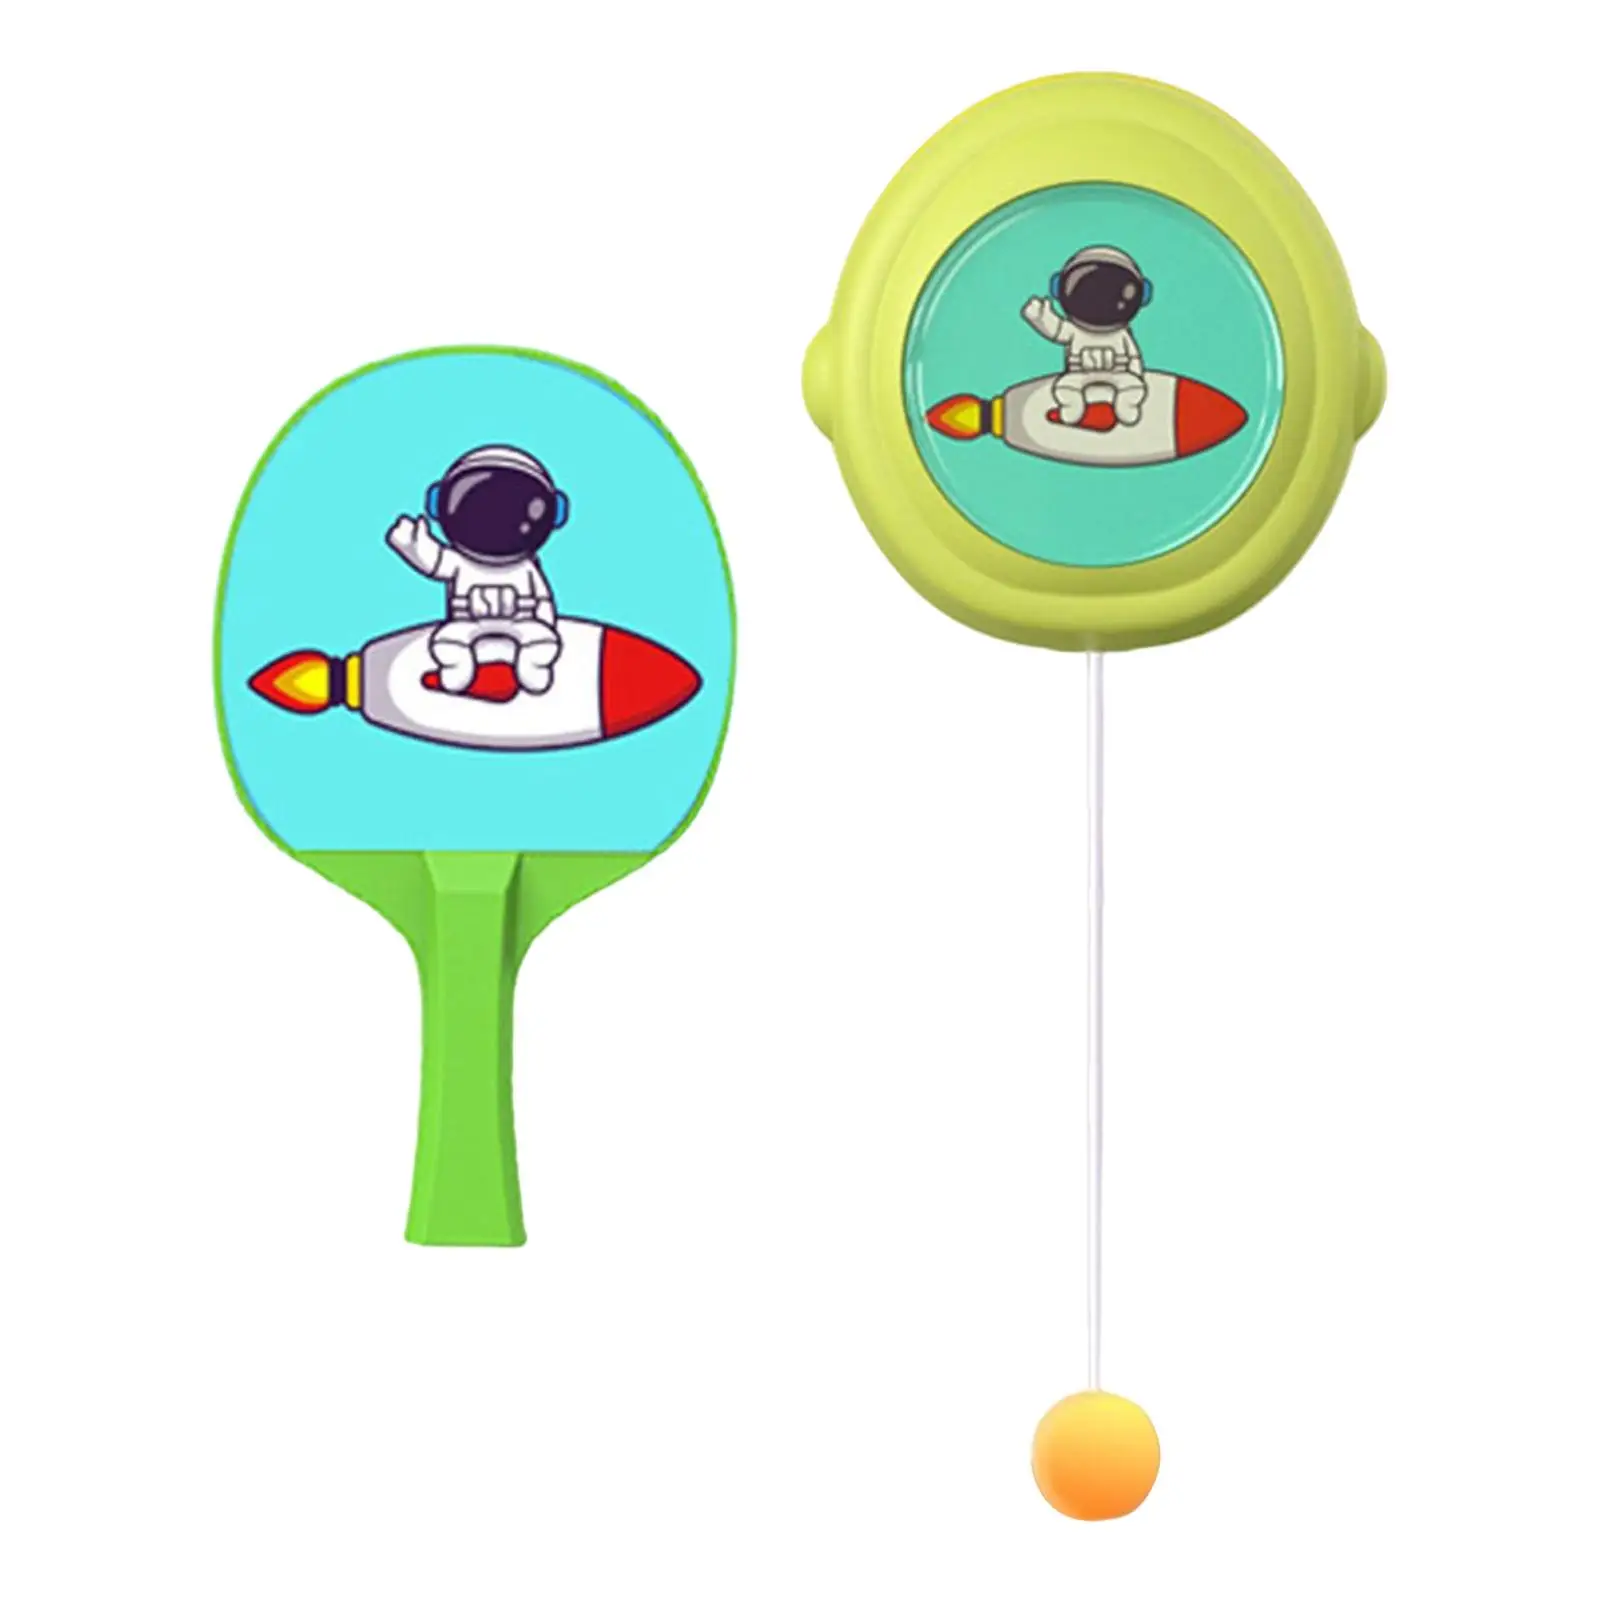 Pingpong Trainer Interaction Toy Practice Hanging Table Tennis Parent Child